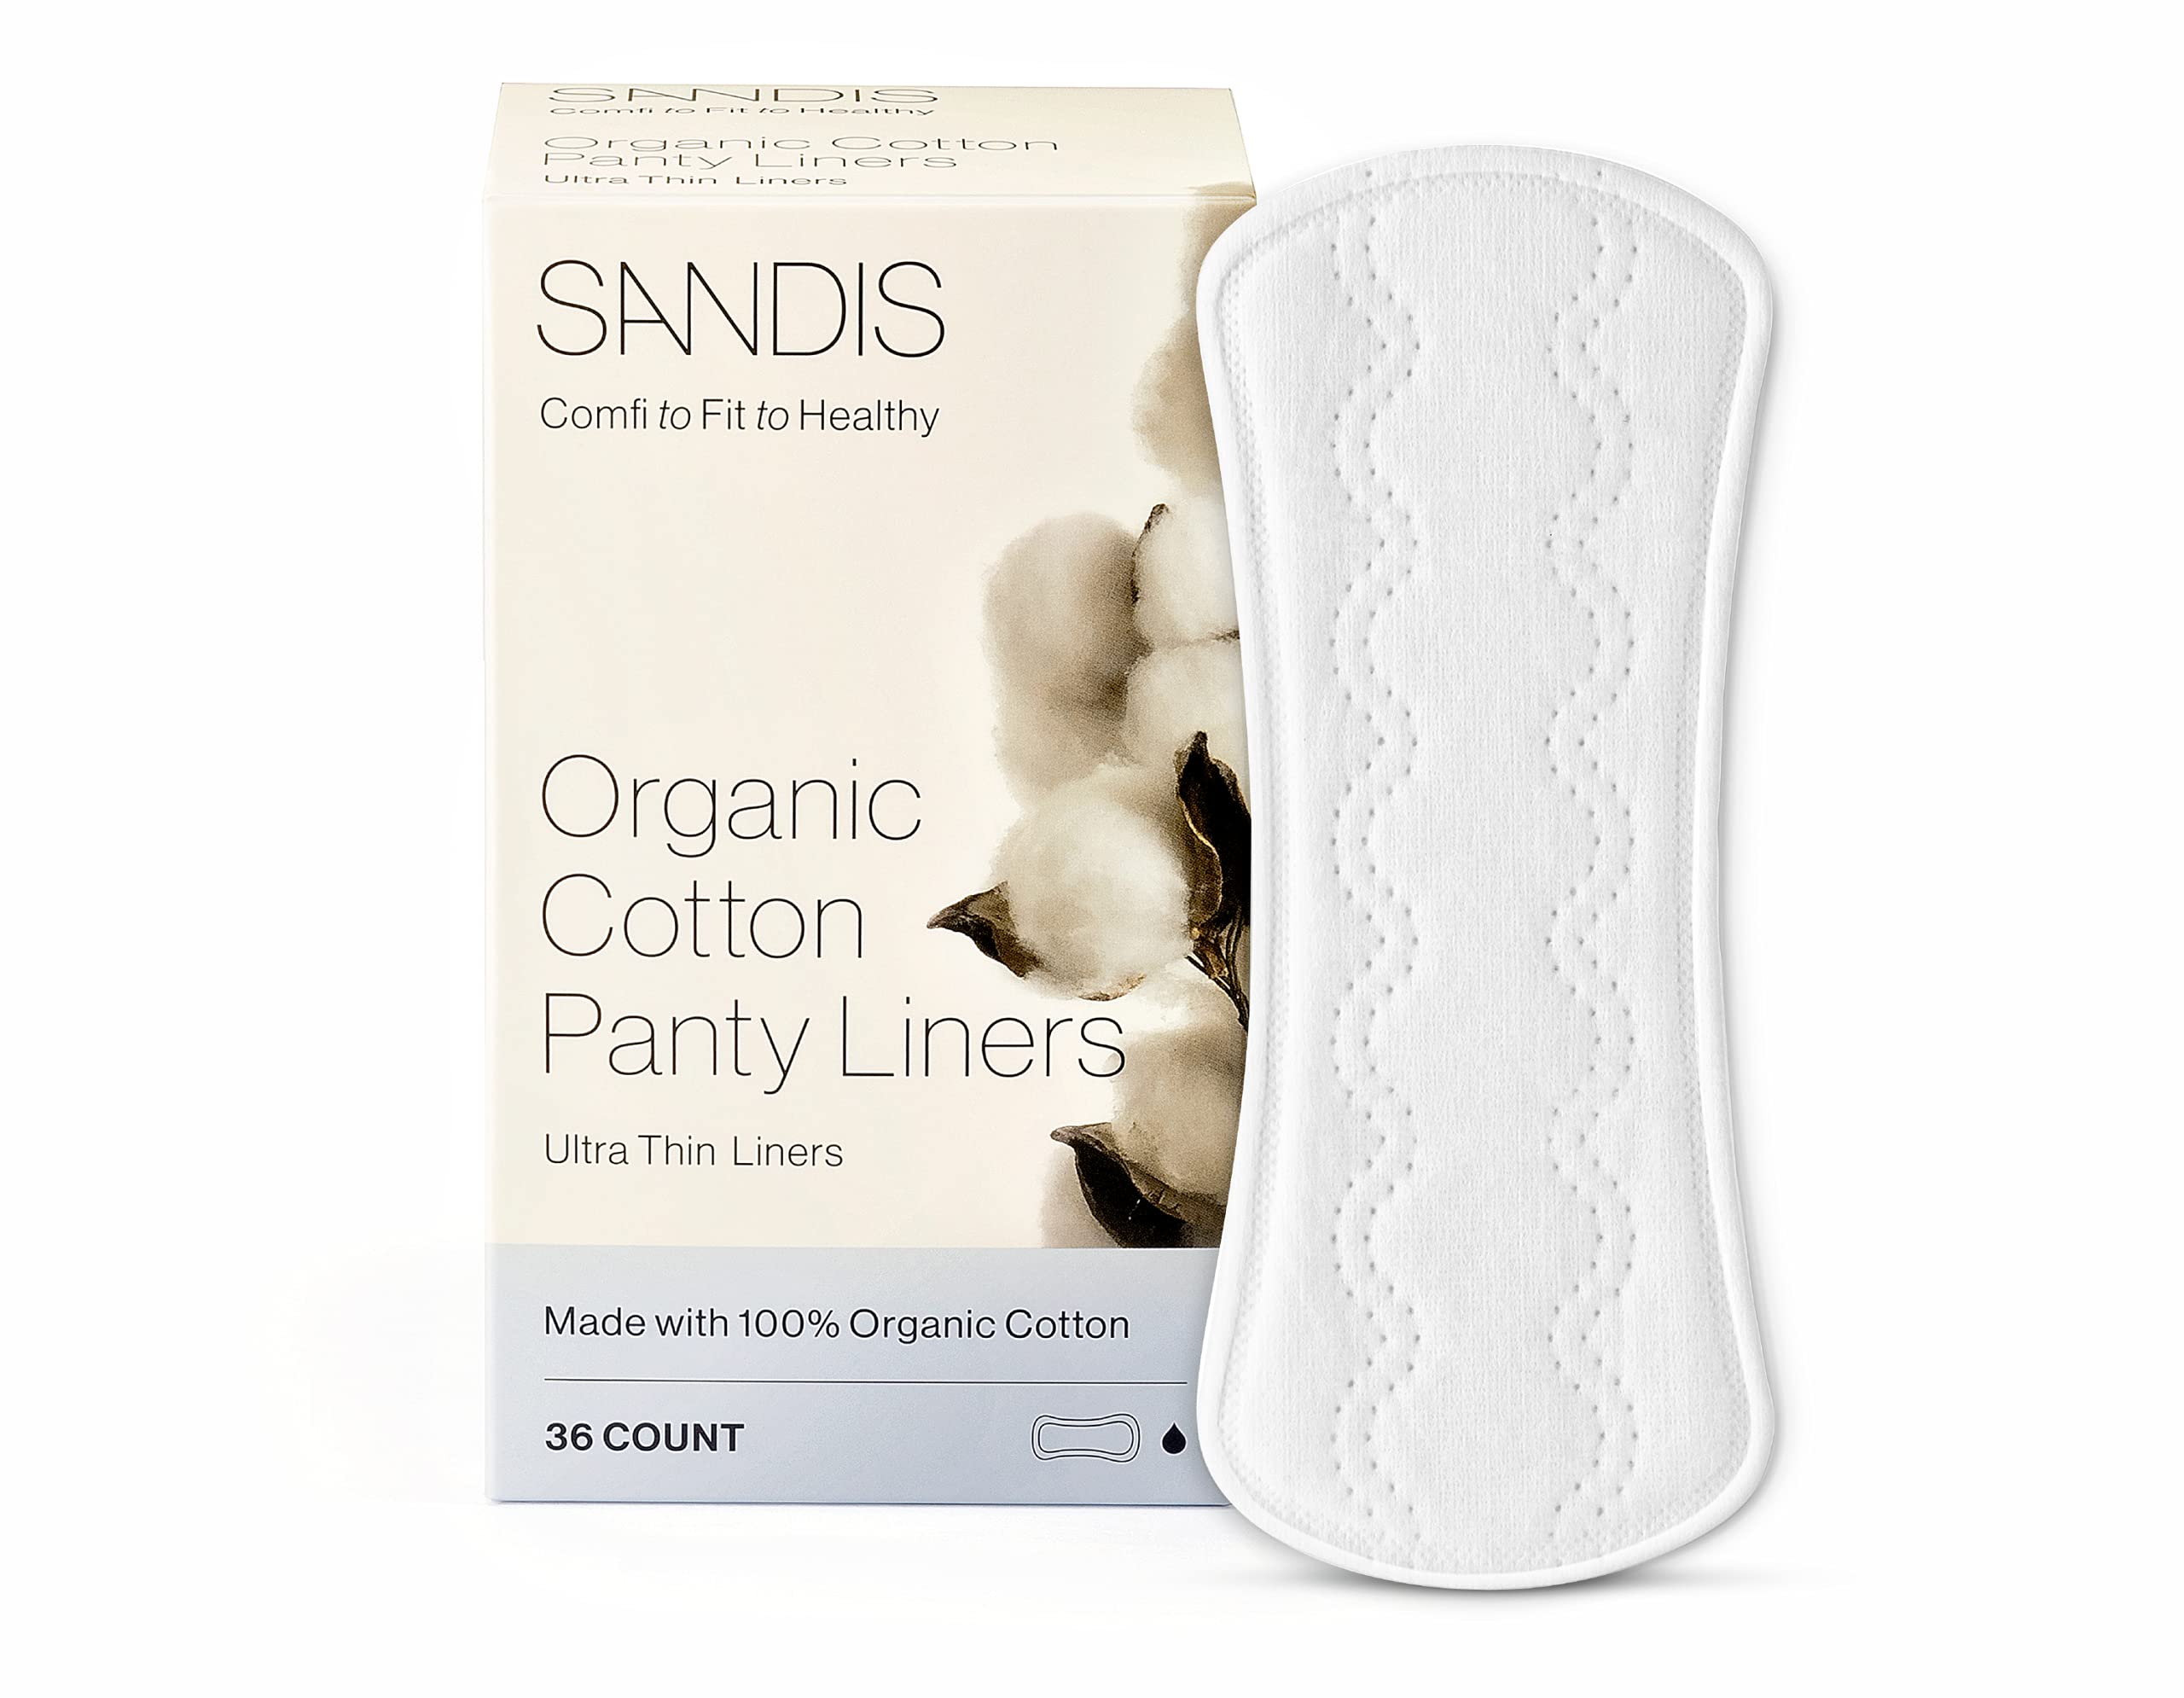 SANDIS Panty Liners for Women - 36 Count 100% Organic Cotton Ultra